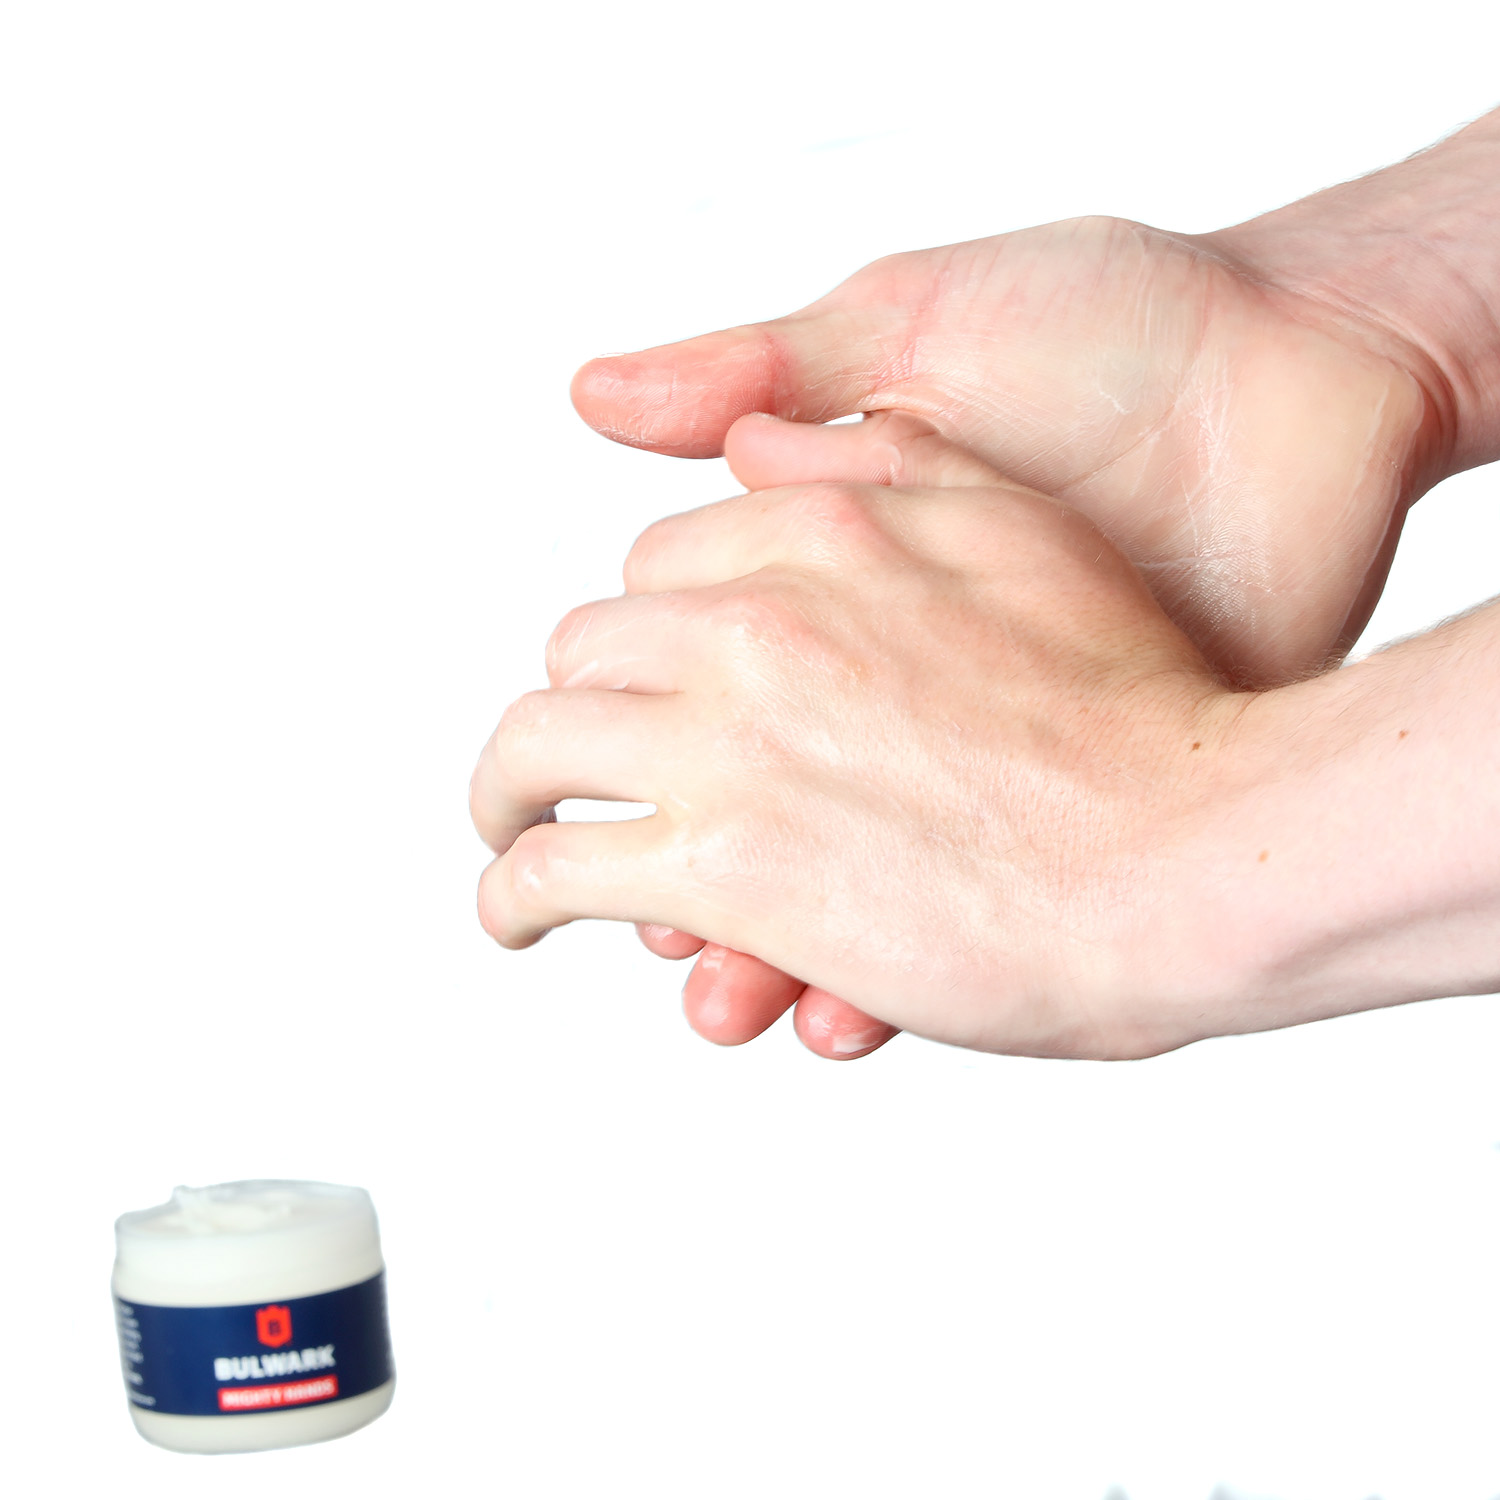 Hand Cream for Hard Working Hands – Mighty Hands from Bulwark Skin Care, 100% Natural Safe Barrier Cream for Men, with Shea Butter, Vitamin E & Hemp Oil, Skin Repair Intensive Hand Balm.